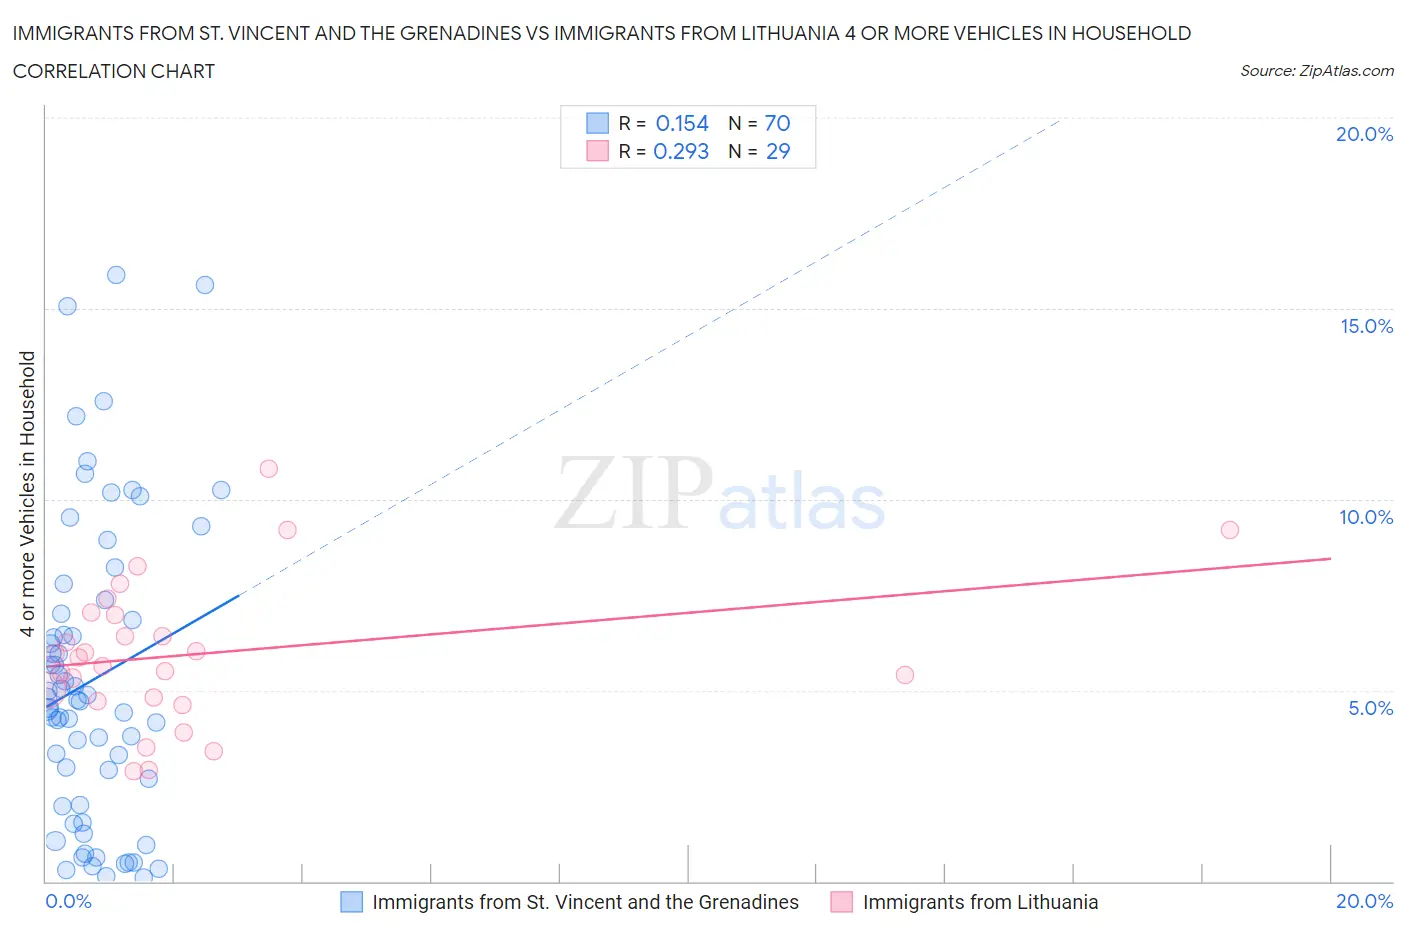 Immigrants from St. Vincent and the Grenadines vs Immigrants from Lithuania 4 or more Vehicles in Household